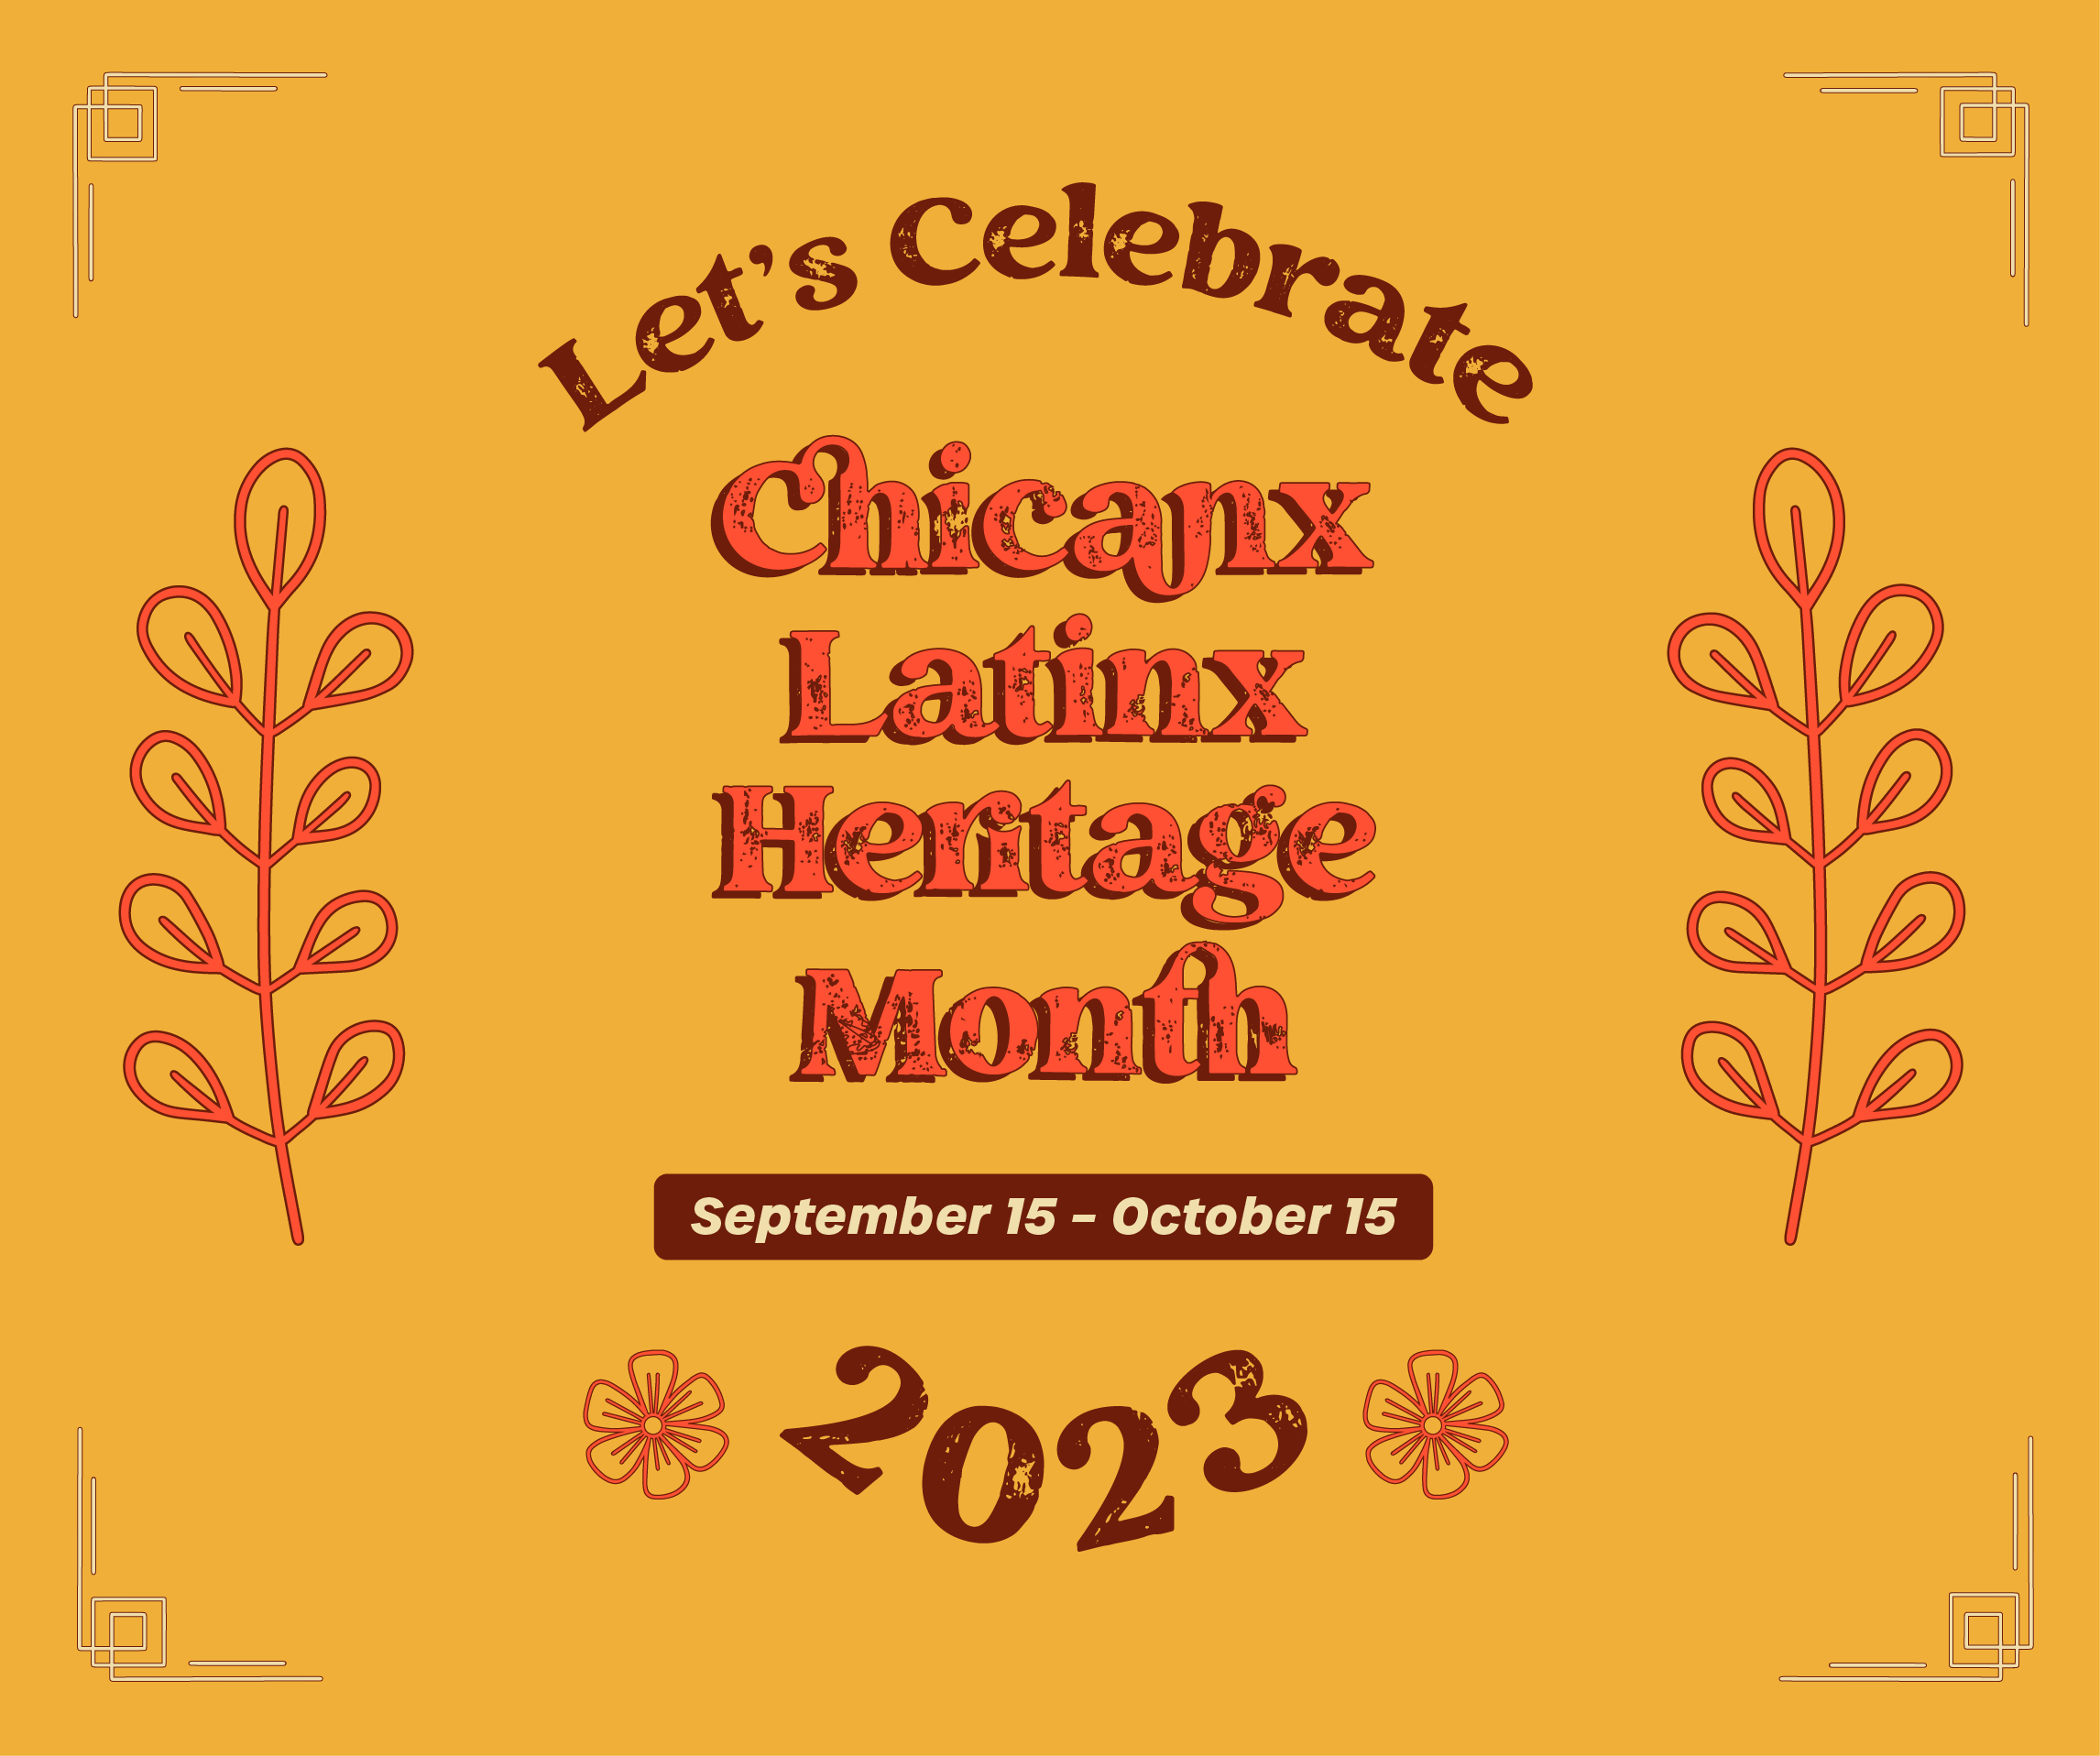 Chicanx Latinx Heritage Month September 15 - October 15 2023